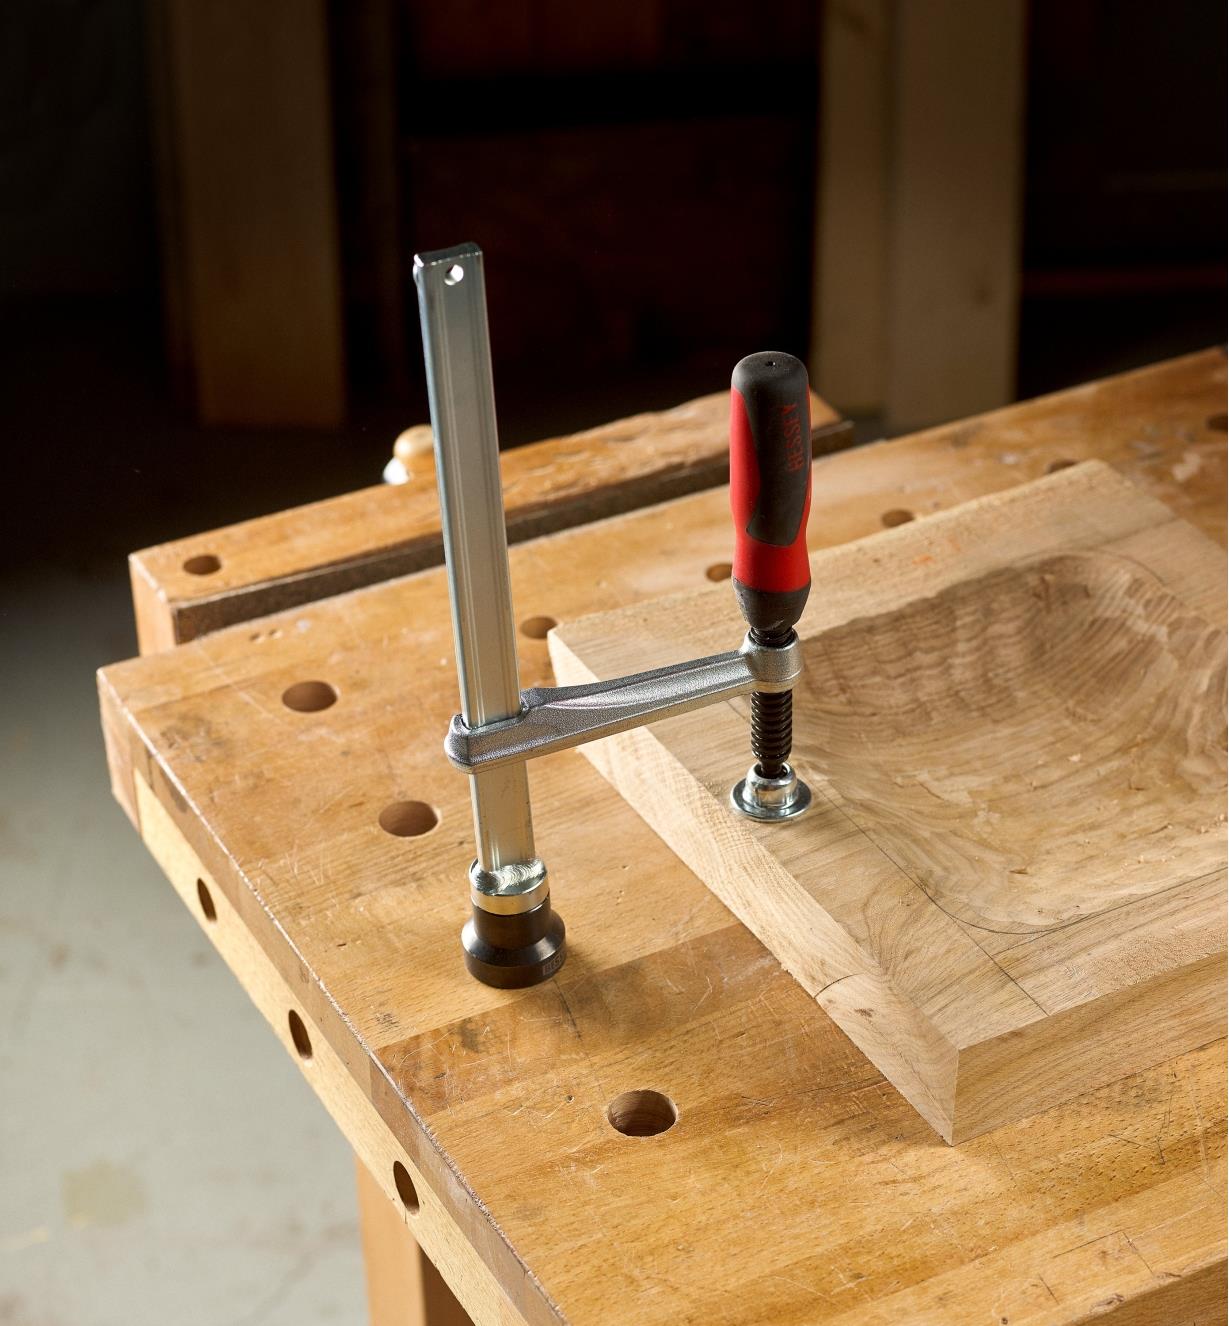 A Bessey hold-down clamp with a straight handle clamping a block of wood to a bench